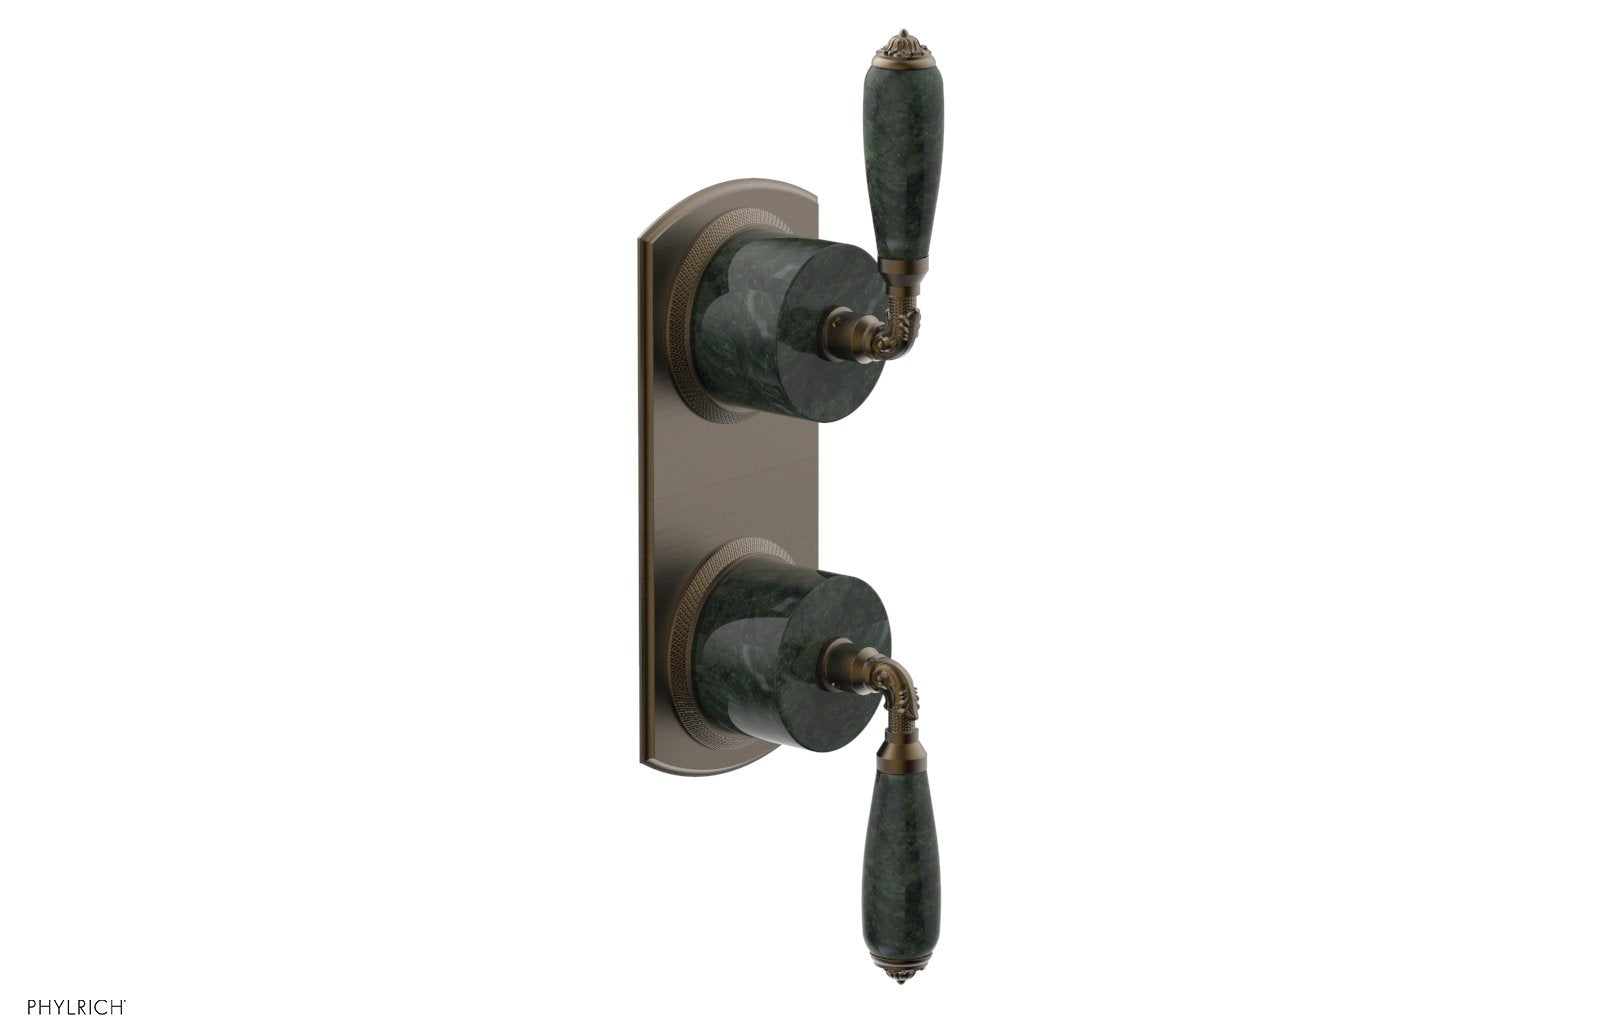 Phylrich VALENCIA Thermostatic Valve with Volume Control or Diverter, Green Marble Lever Handles